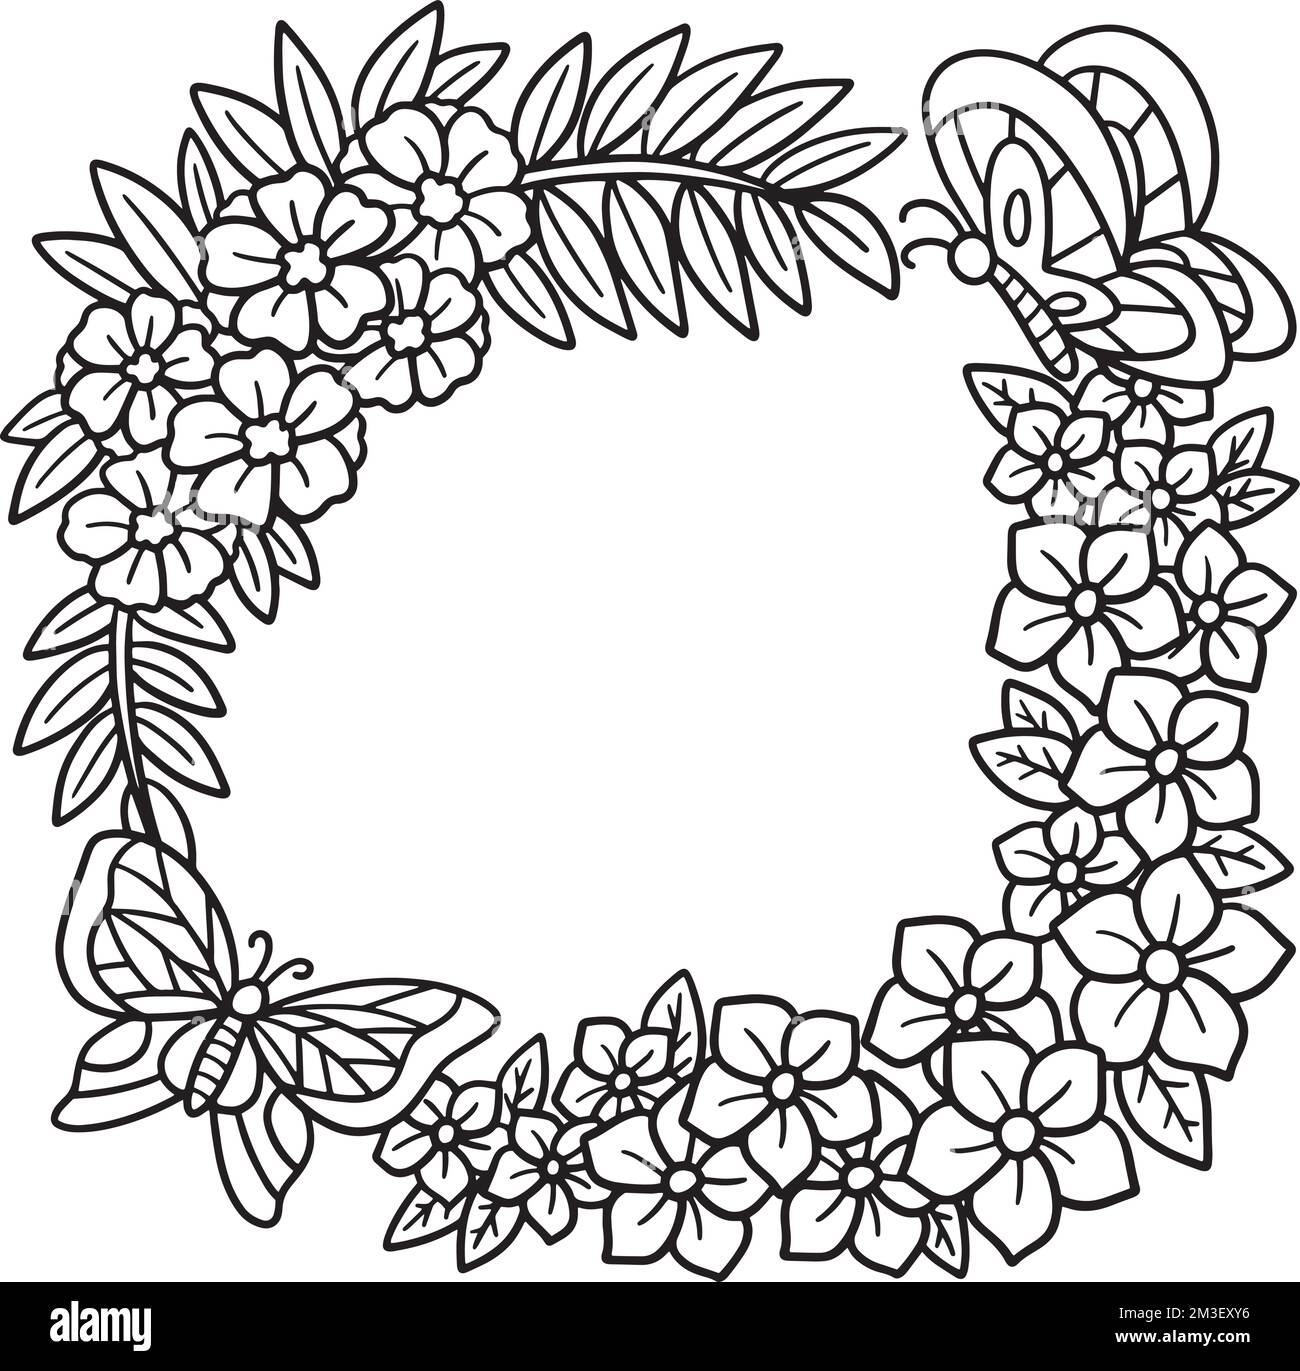 Floral Wreath Isolated Coloring Page for Kids Stock Vector